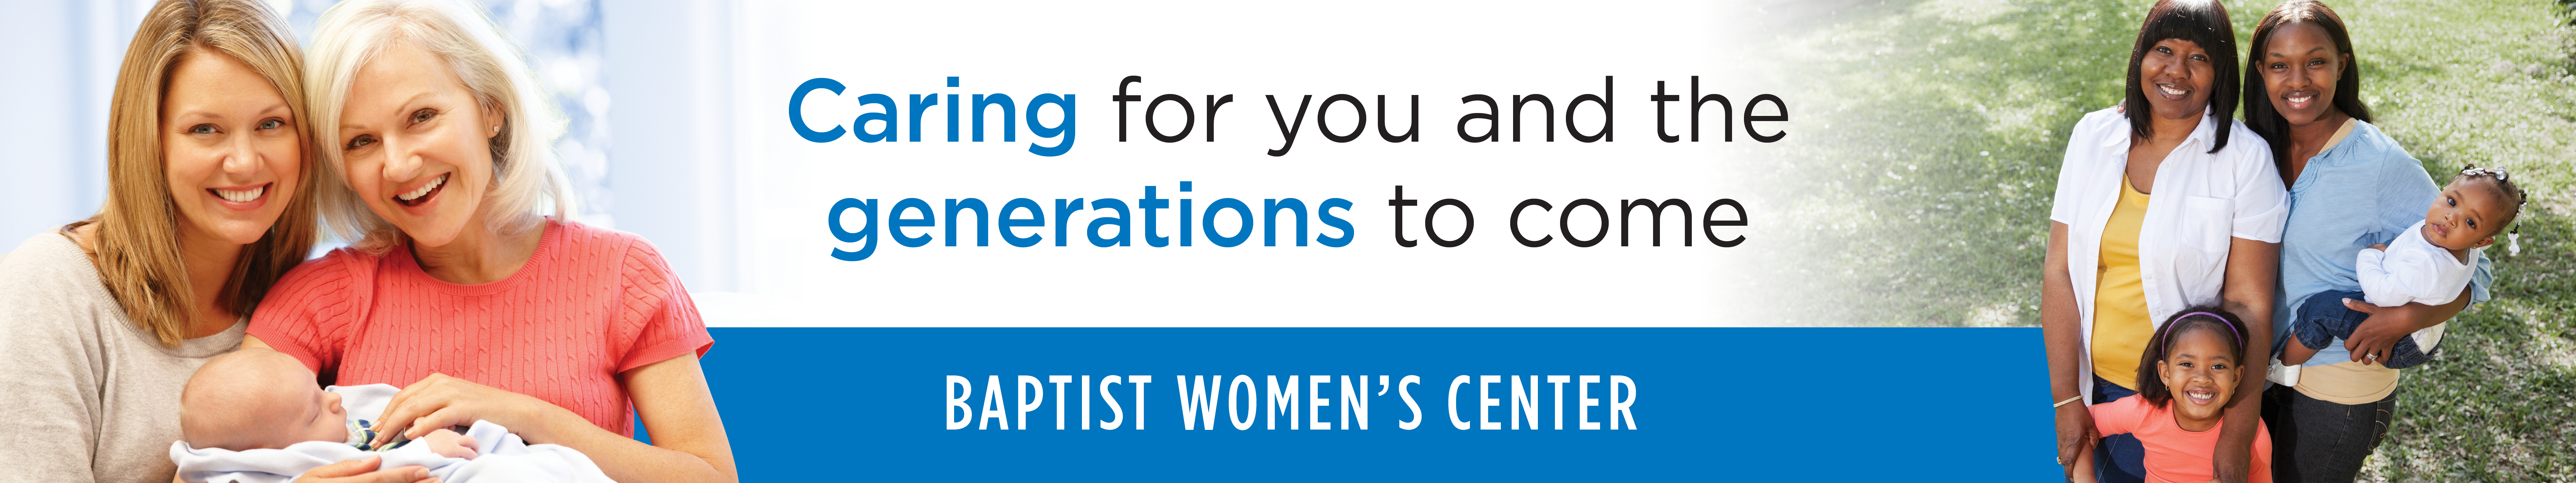 Caring for you and the generations to come. Baptist Women's Center